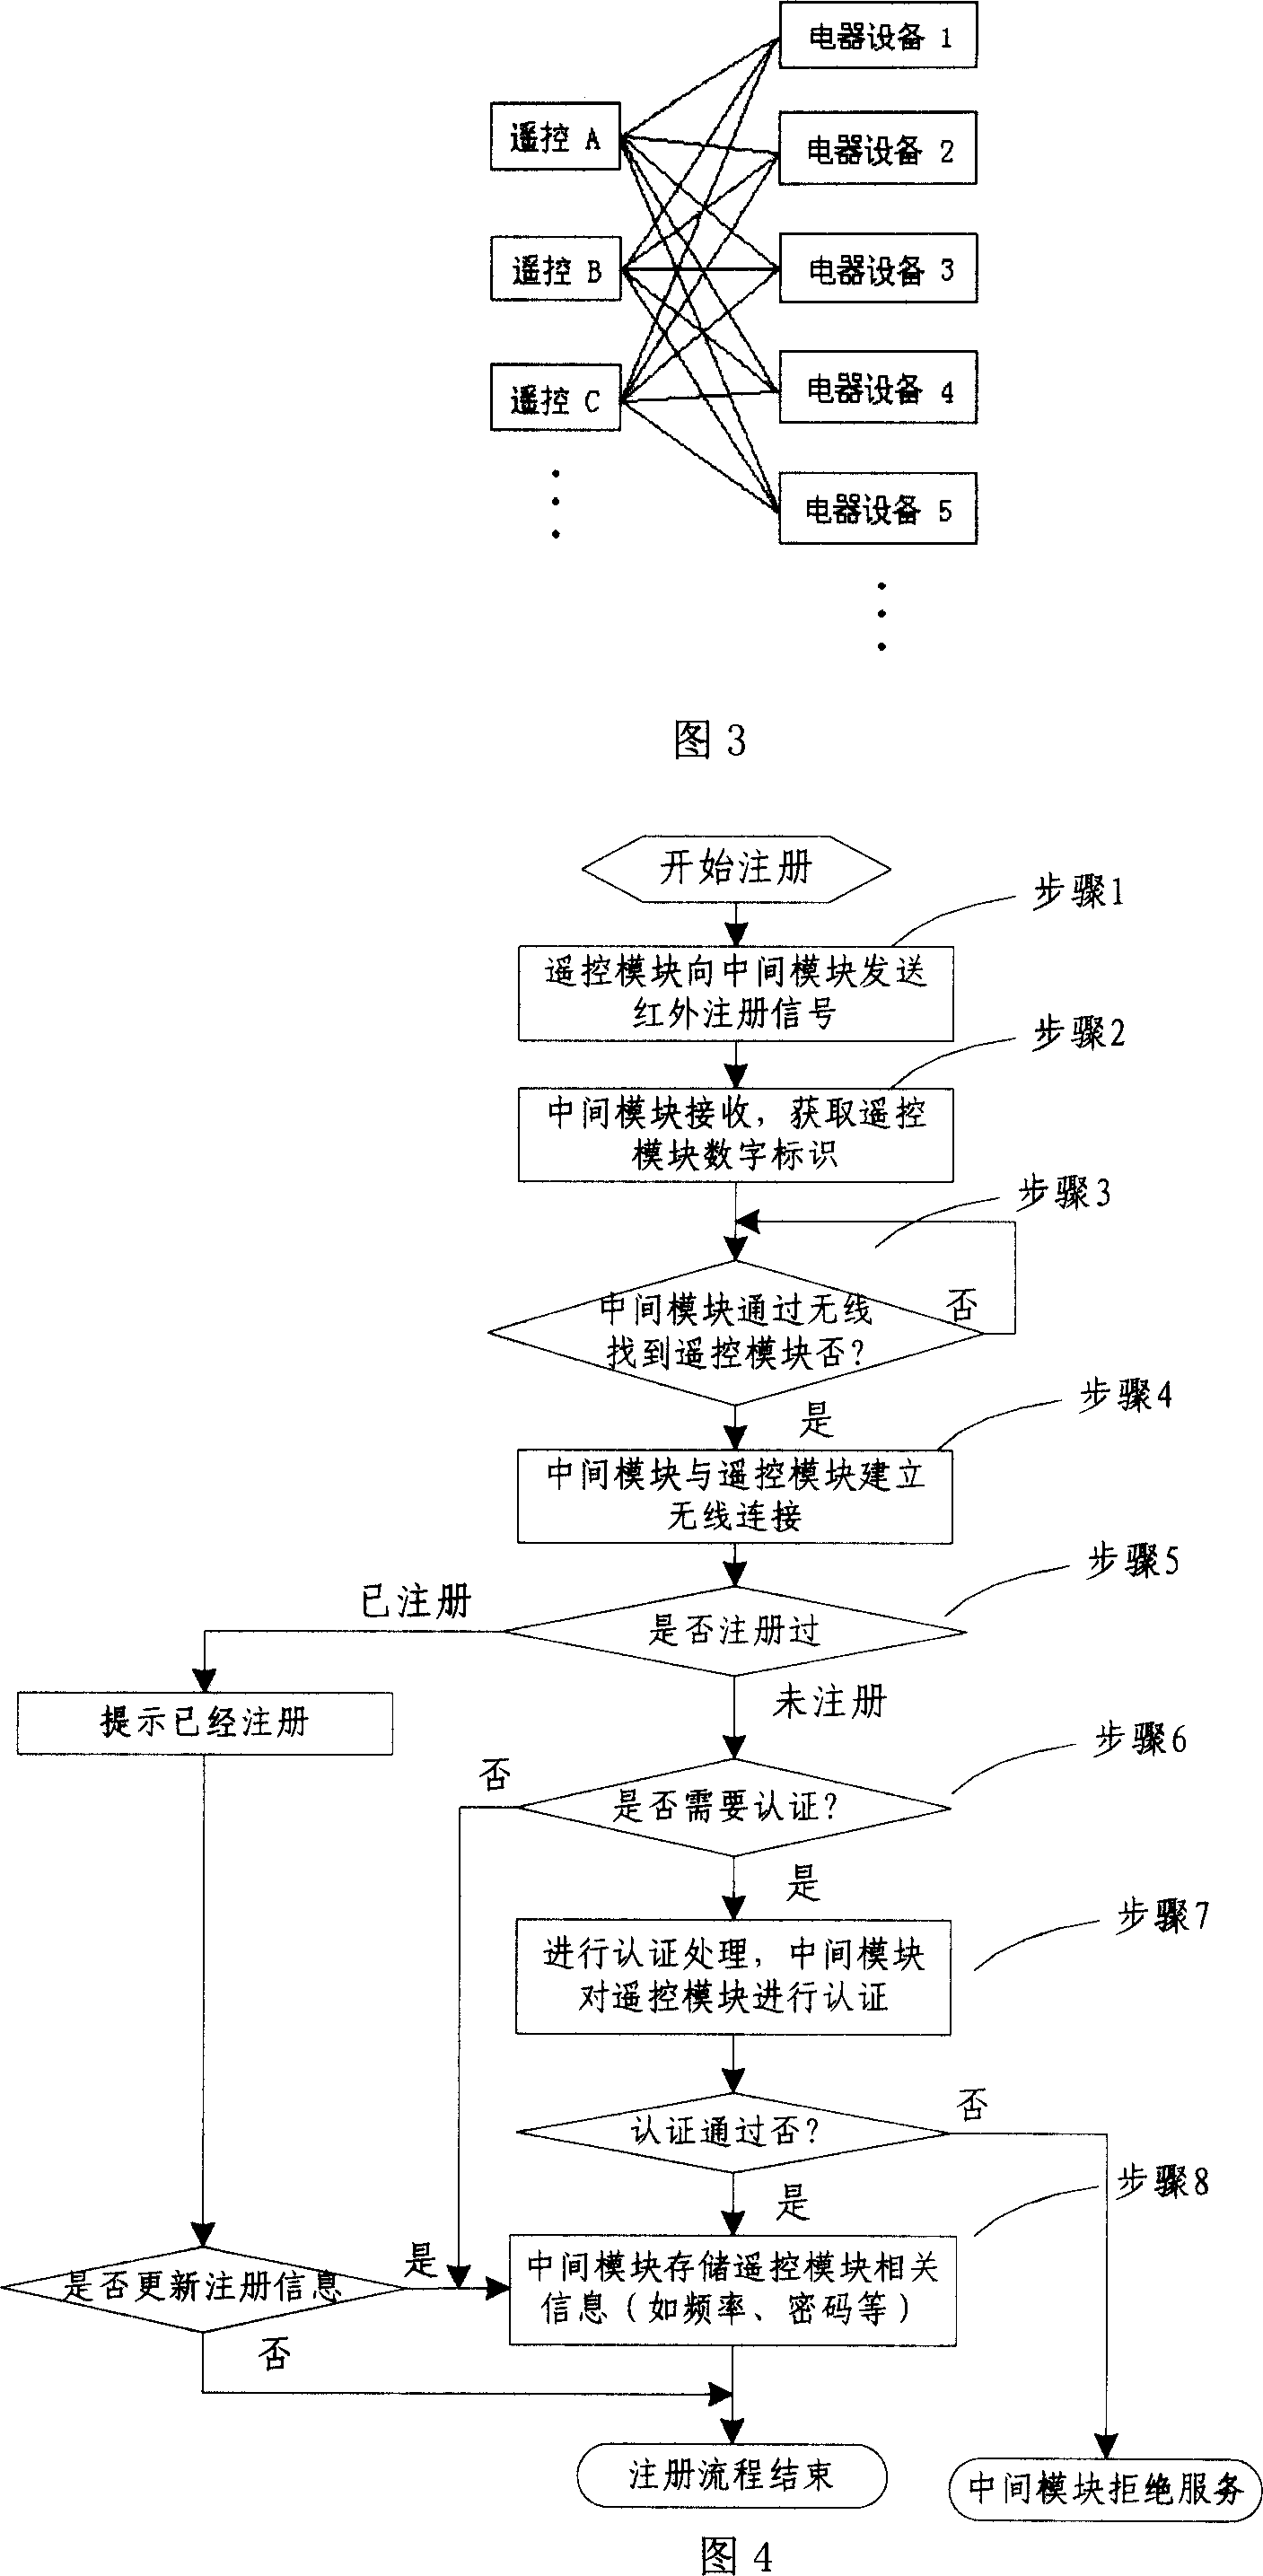 Selective intelligent remote control system and method